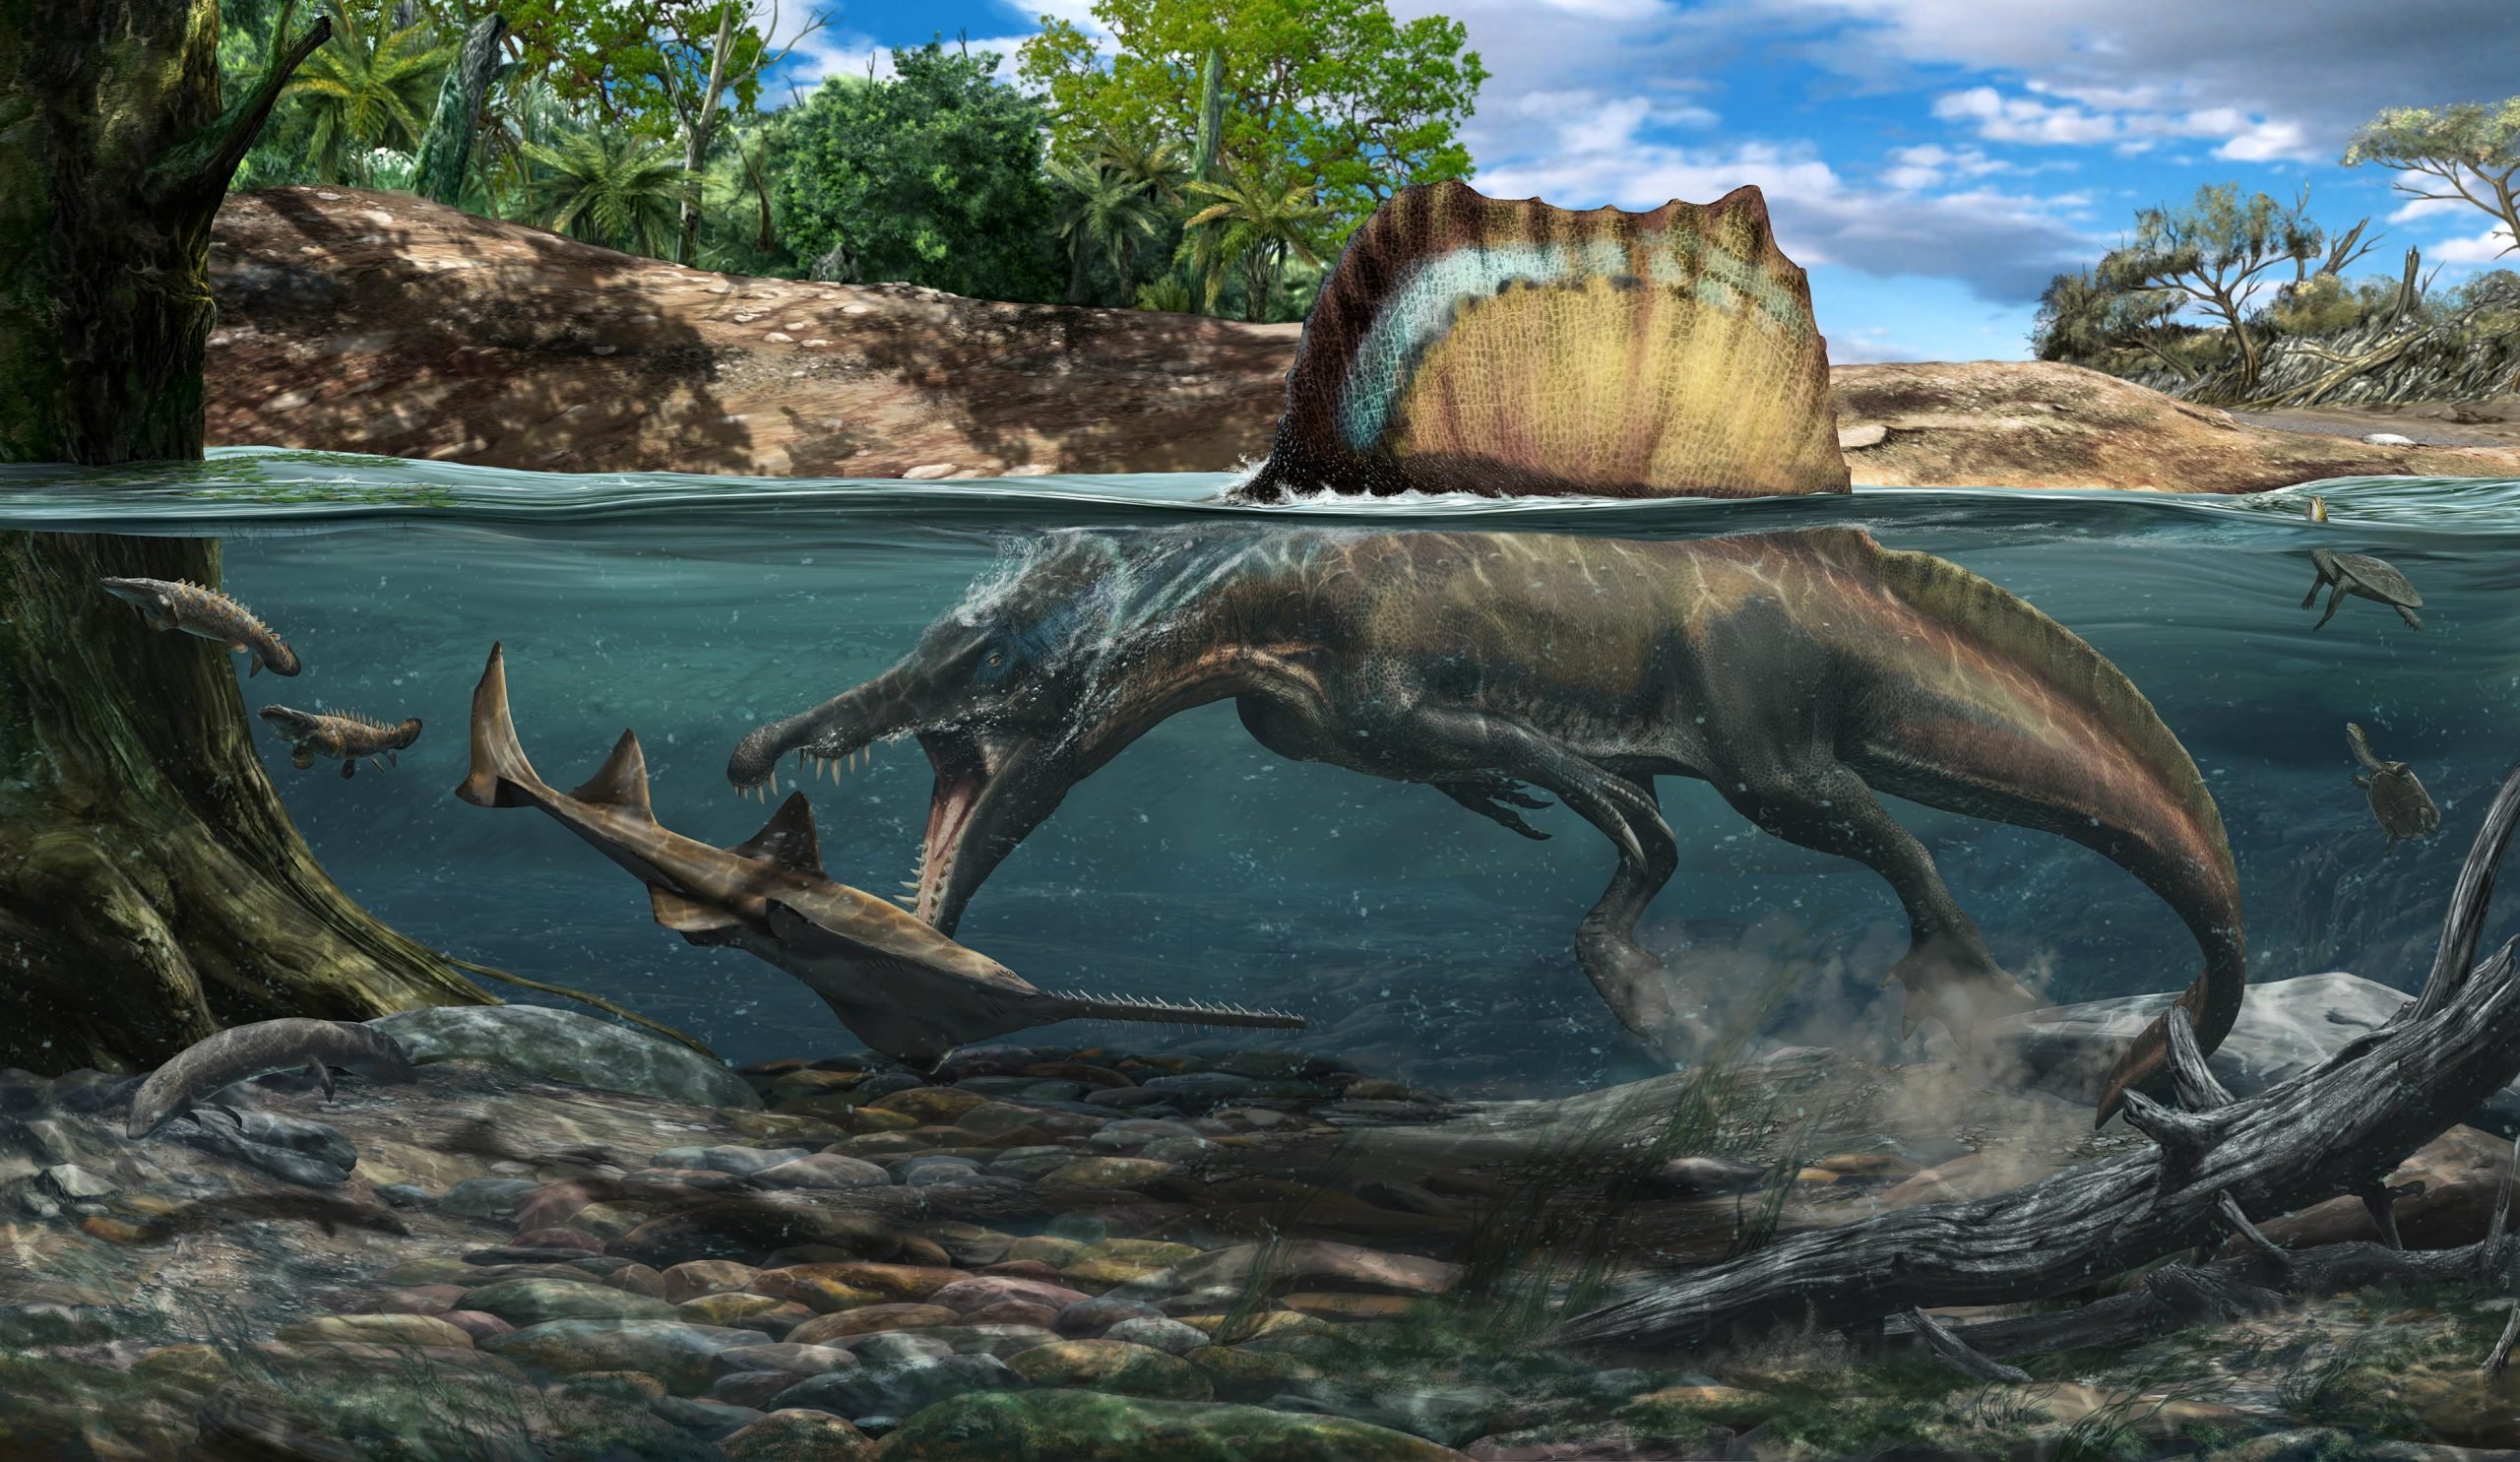 Spinosaurus “River Monster” Secrets Revealed in New Study – Predatory  Dinosaur Was Larger Than T. rex